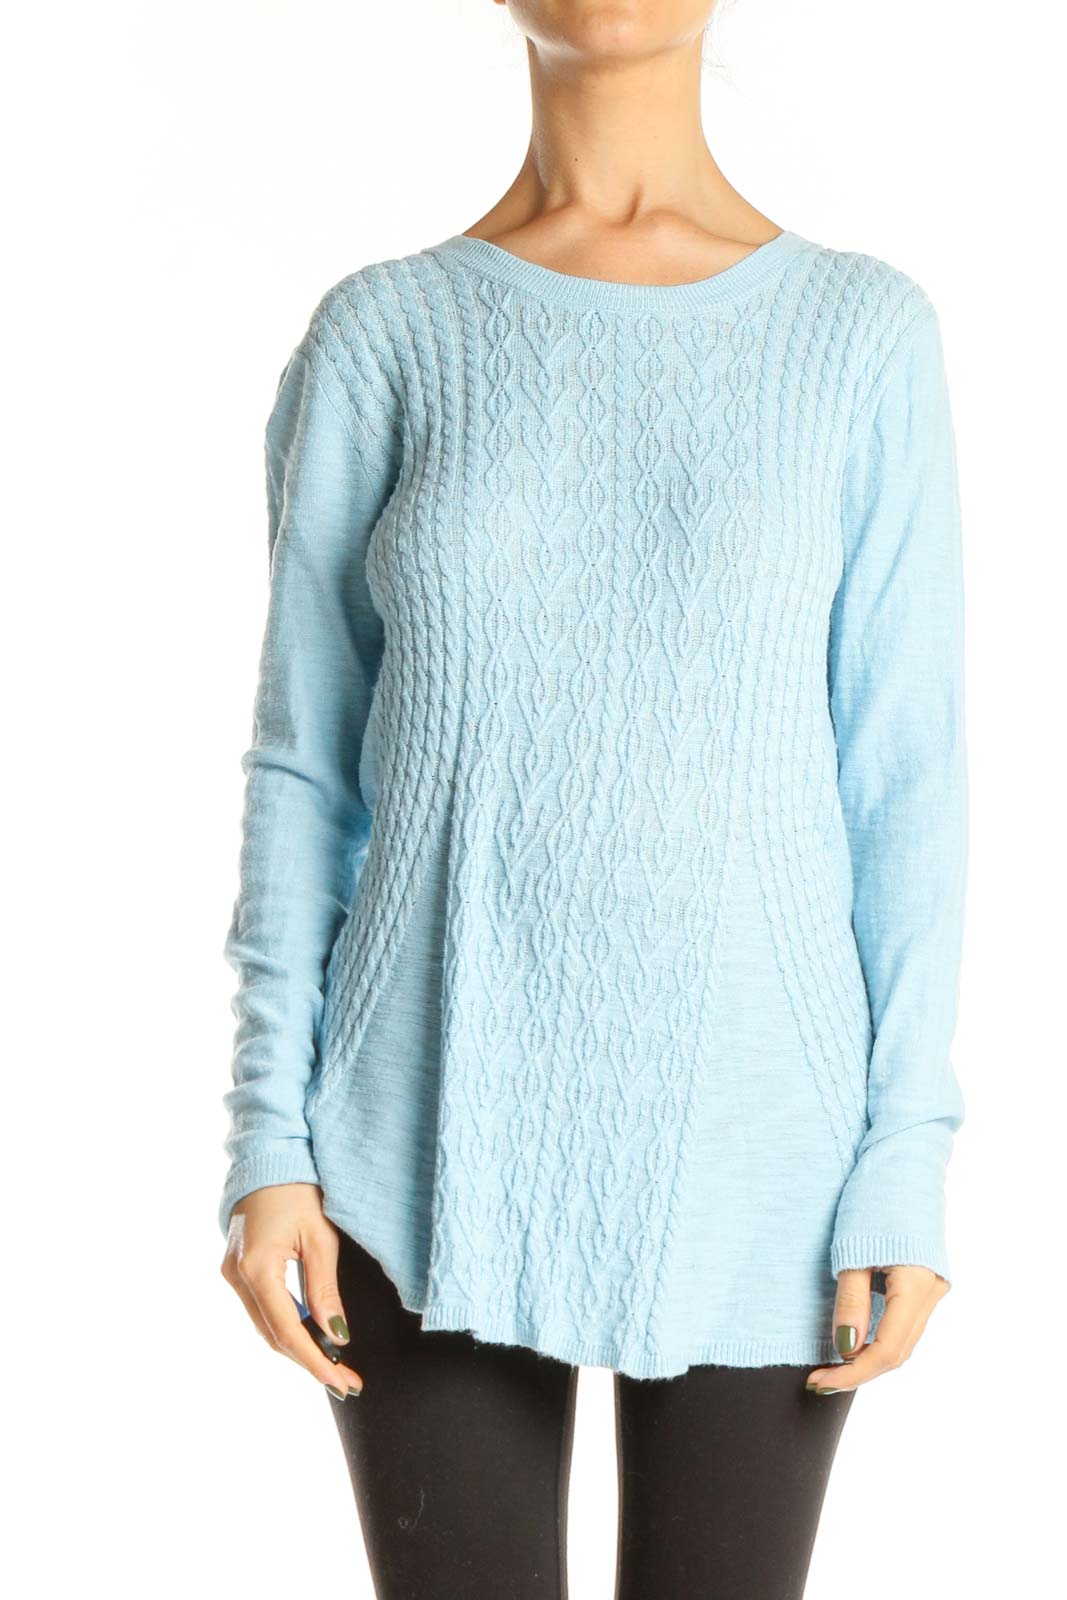 Blue All Day Wear Sweater Front